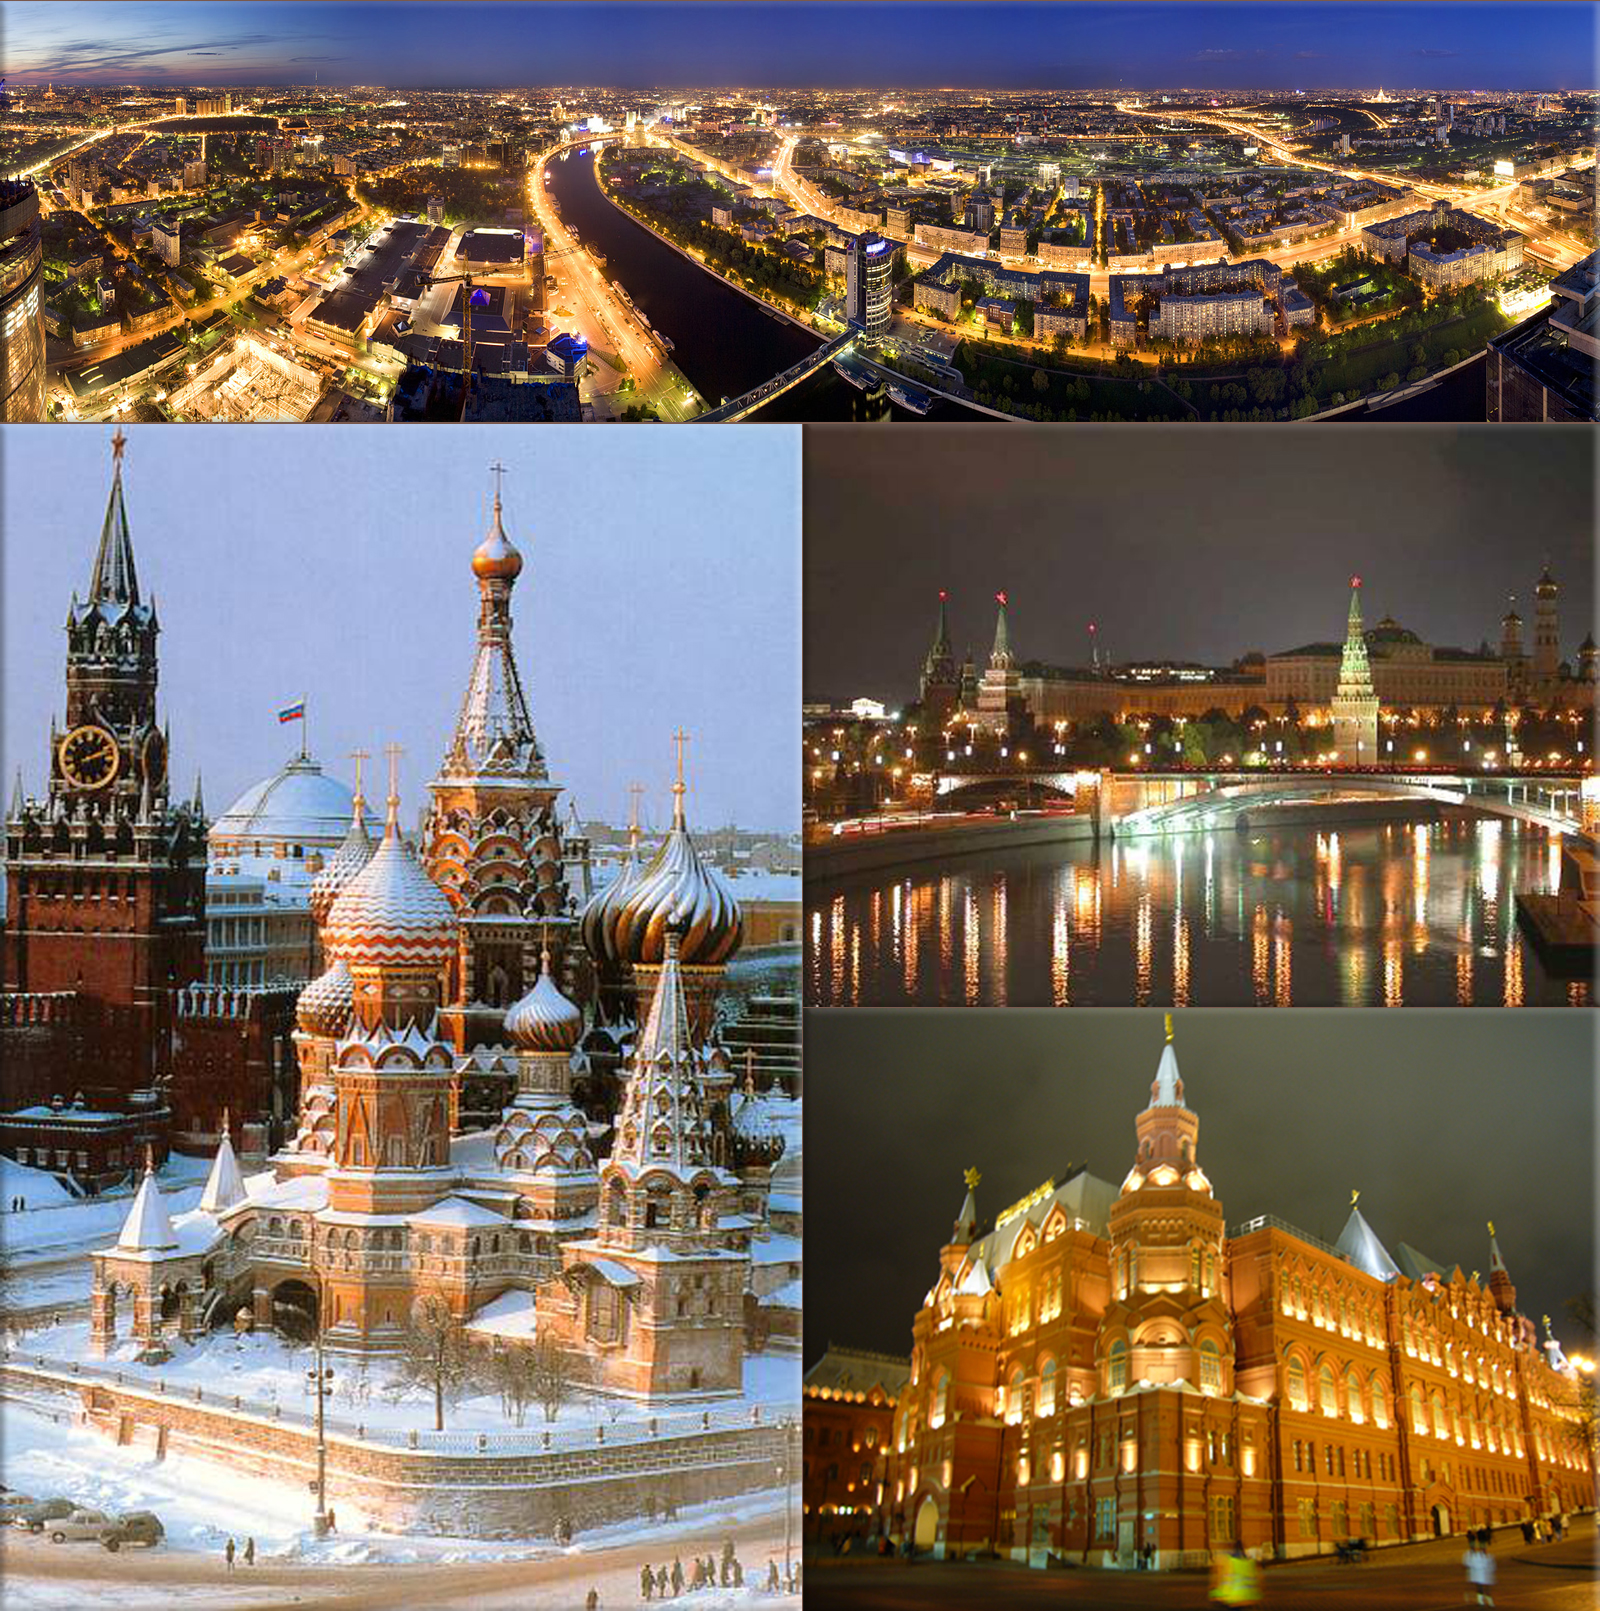 Moscow becomes the capital of Russia again after Saint Petersburg held this status for 215 years on March 12th, 1918